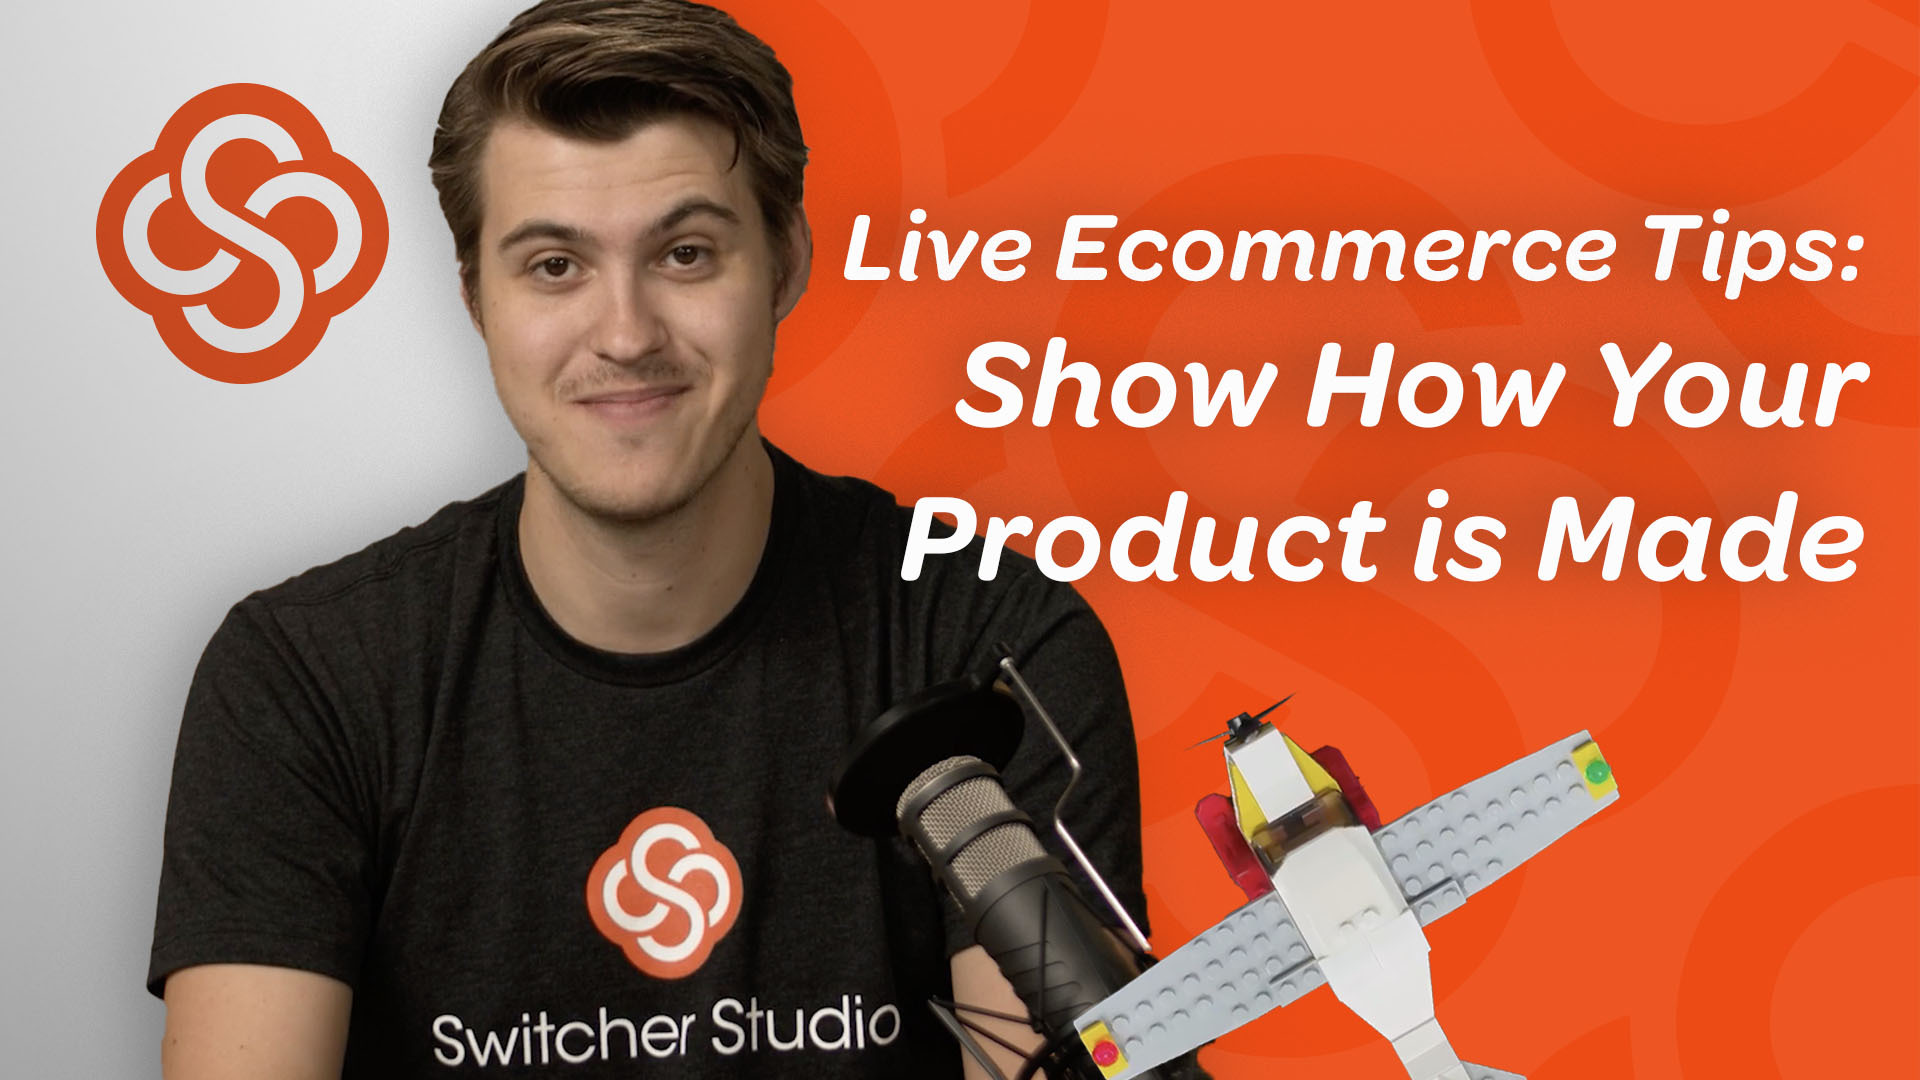 Live Ecommerce Tips: Show How Your Product is Made